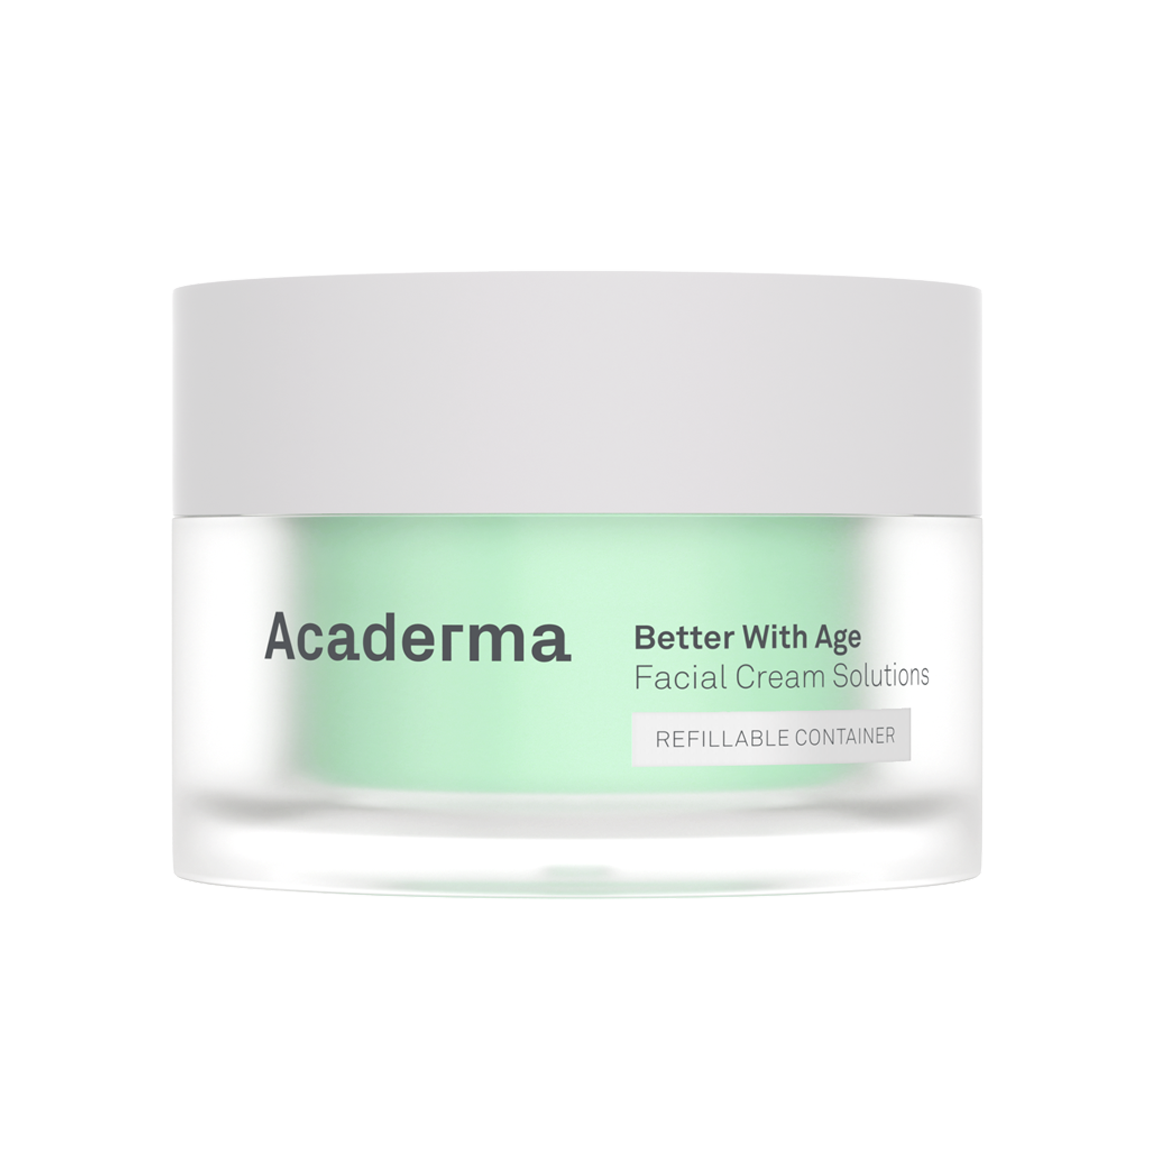 Acaderma Better With Age Revival Light Cream image2